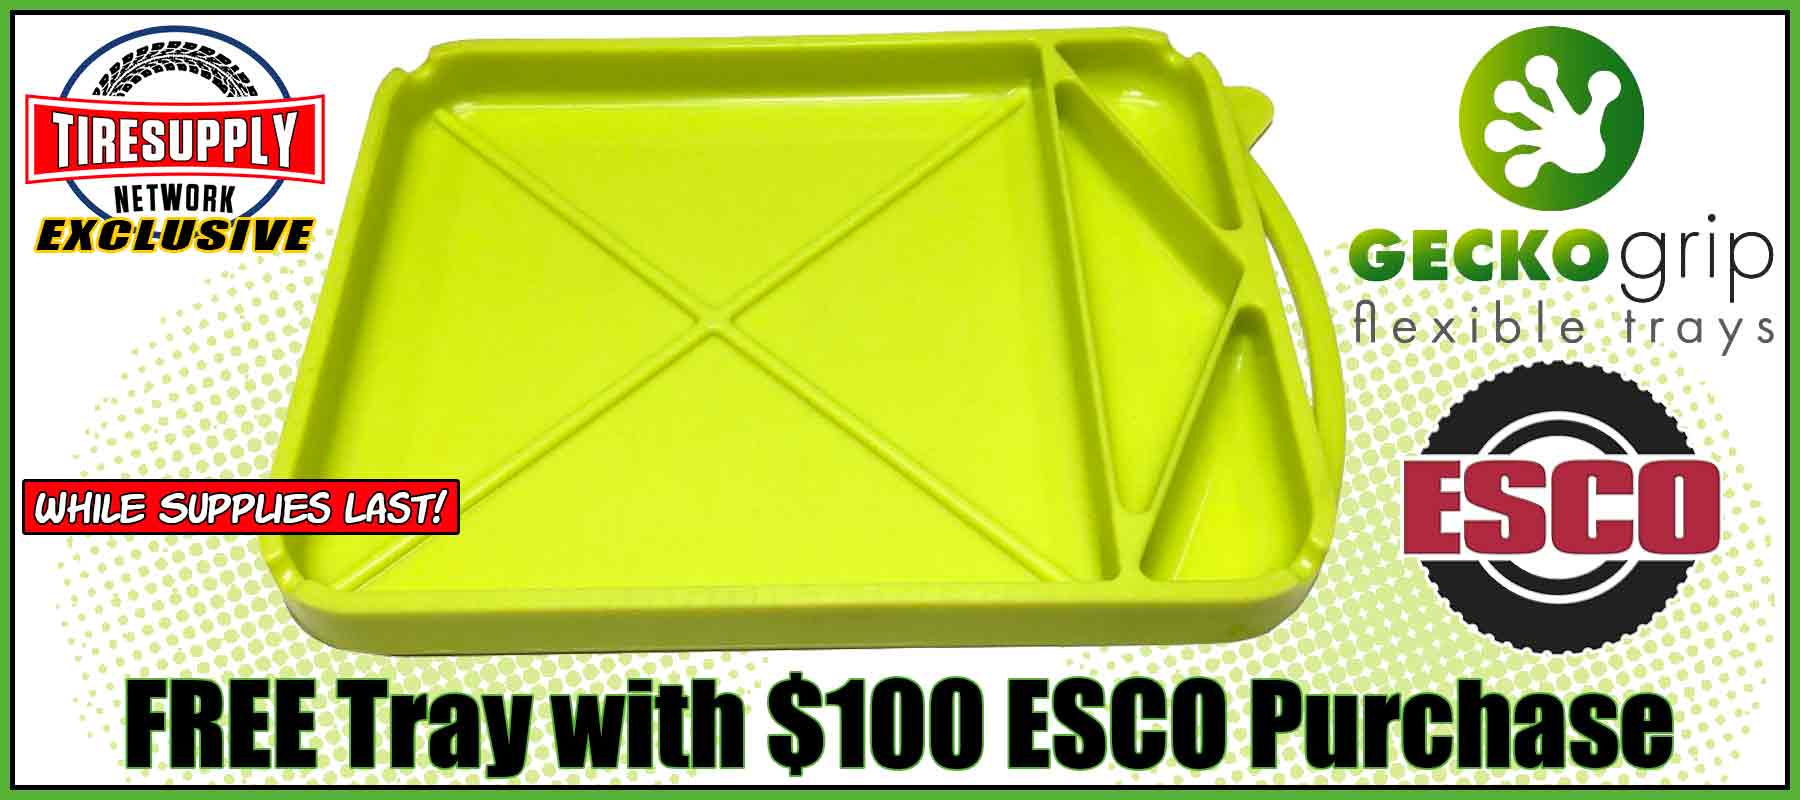 FREE GeckoGrip Medium Flexible Silicone Tray with $100 ESCO Tool and Equipment Purchase!